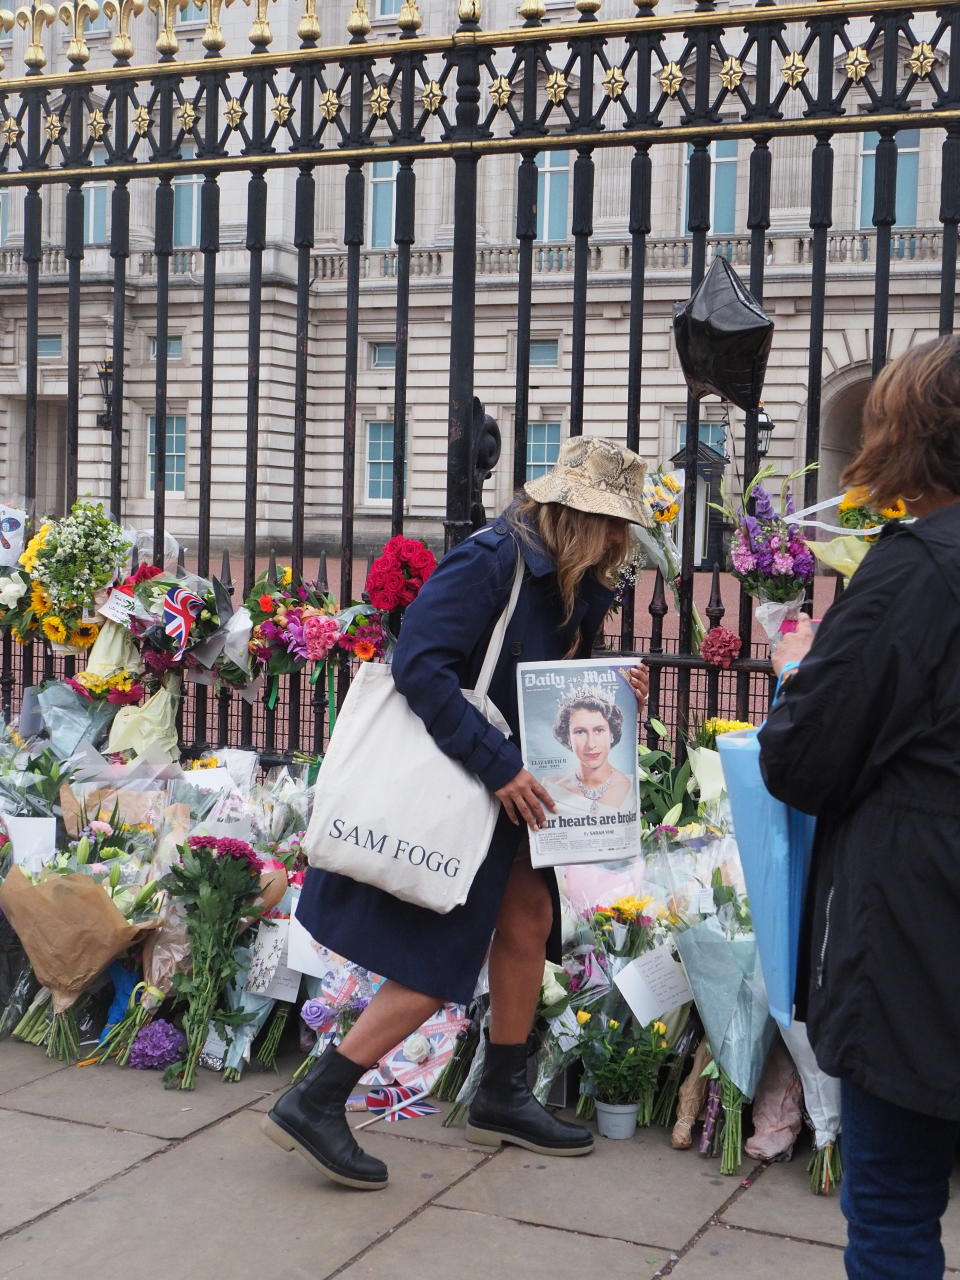 Crowds of well-wishers left tributes at Buckingham Palace on Friday (@paulphln)